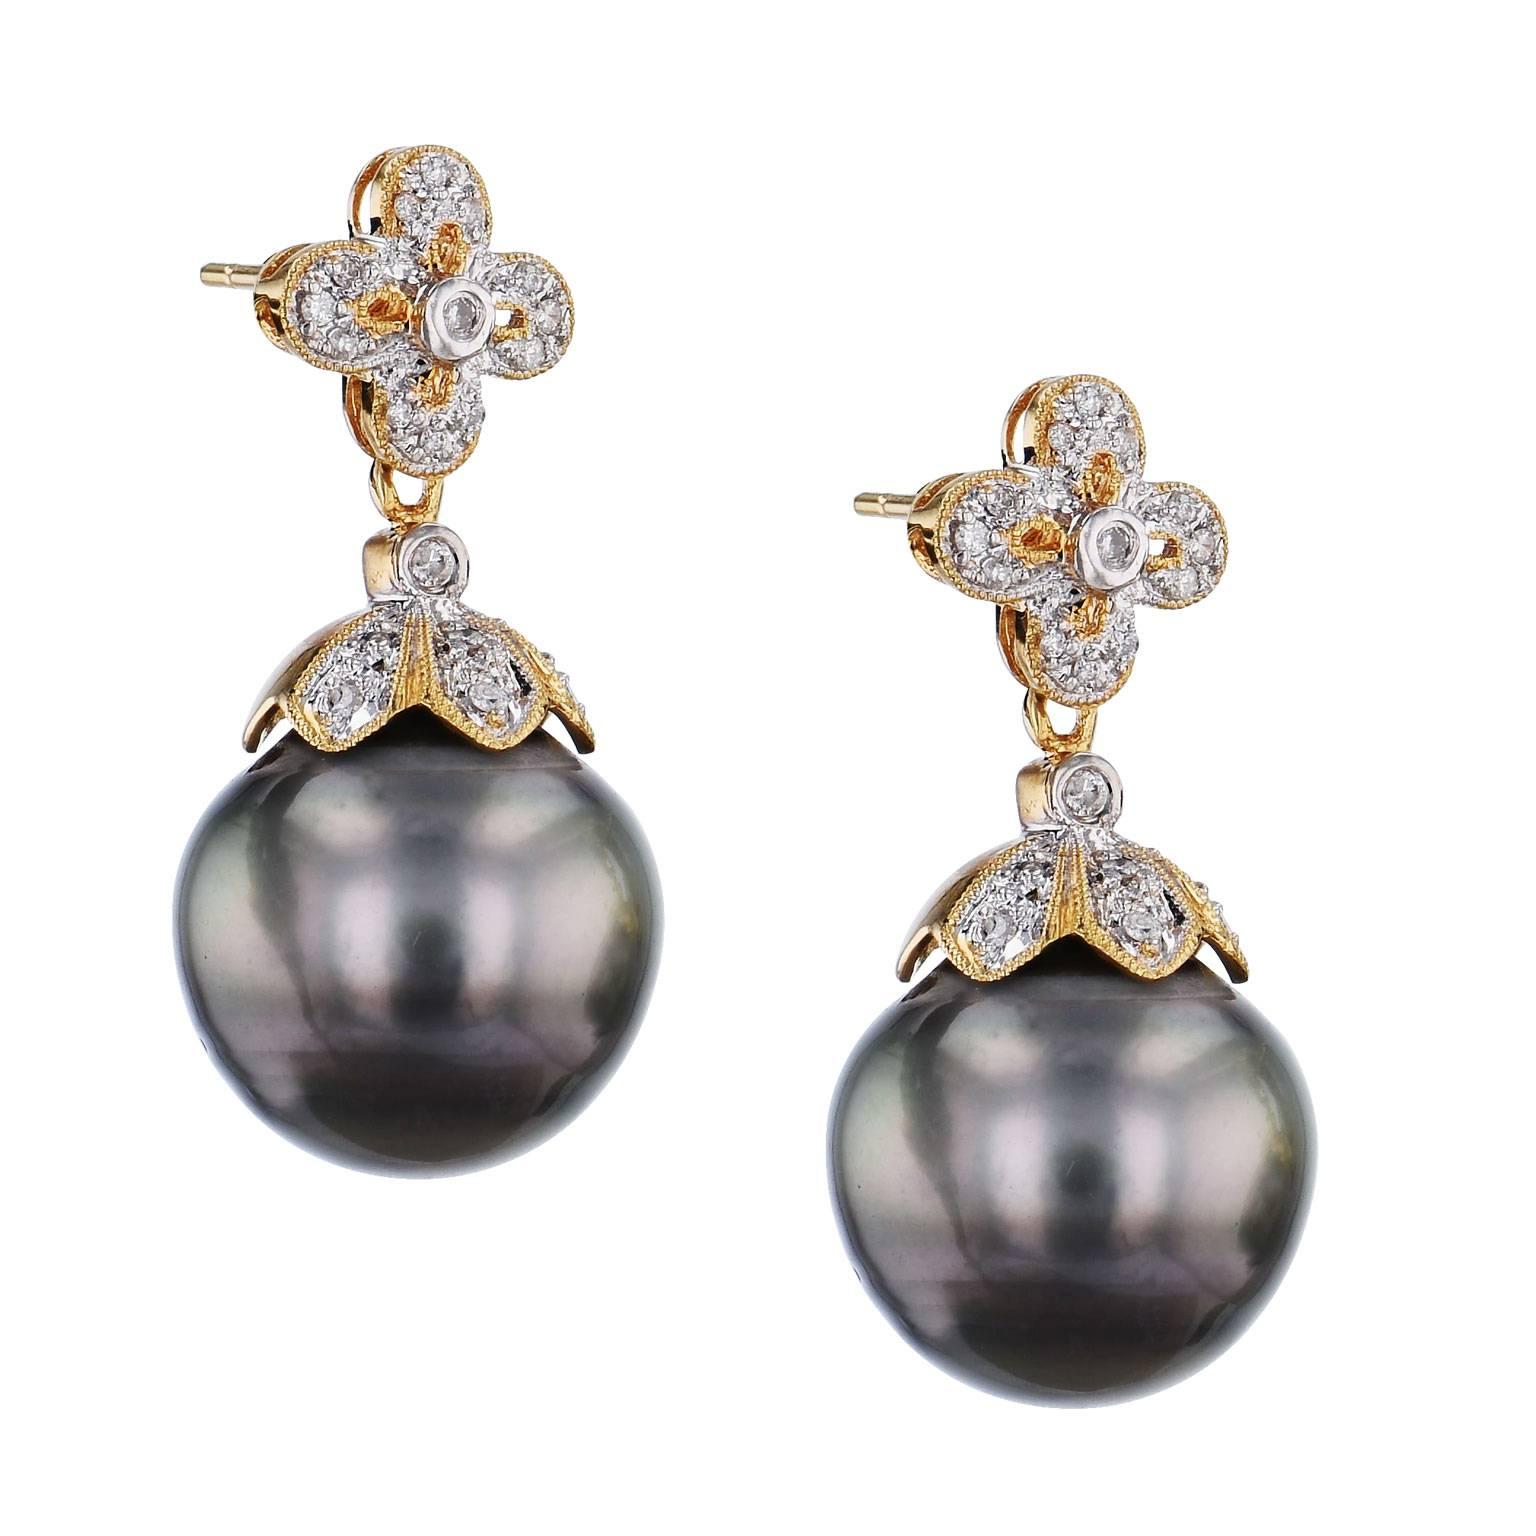 13.40 millimeter Tahitian pearls catch the eye as 0.25 carat of pave-set diamond (G/H/SI) in ornate embellishment dazzle in these previously loved 18 karat yellow gold drop earrings.